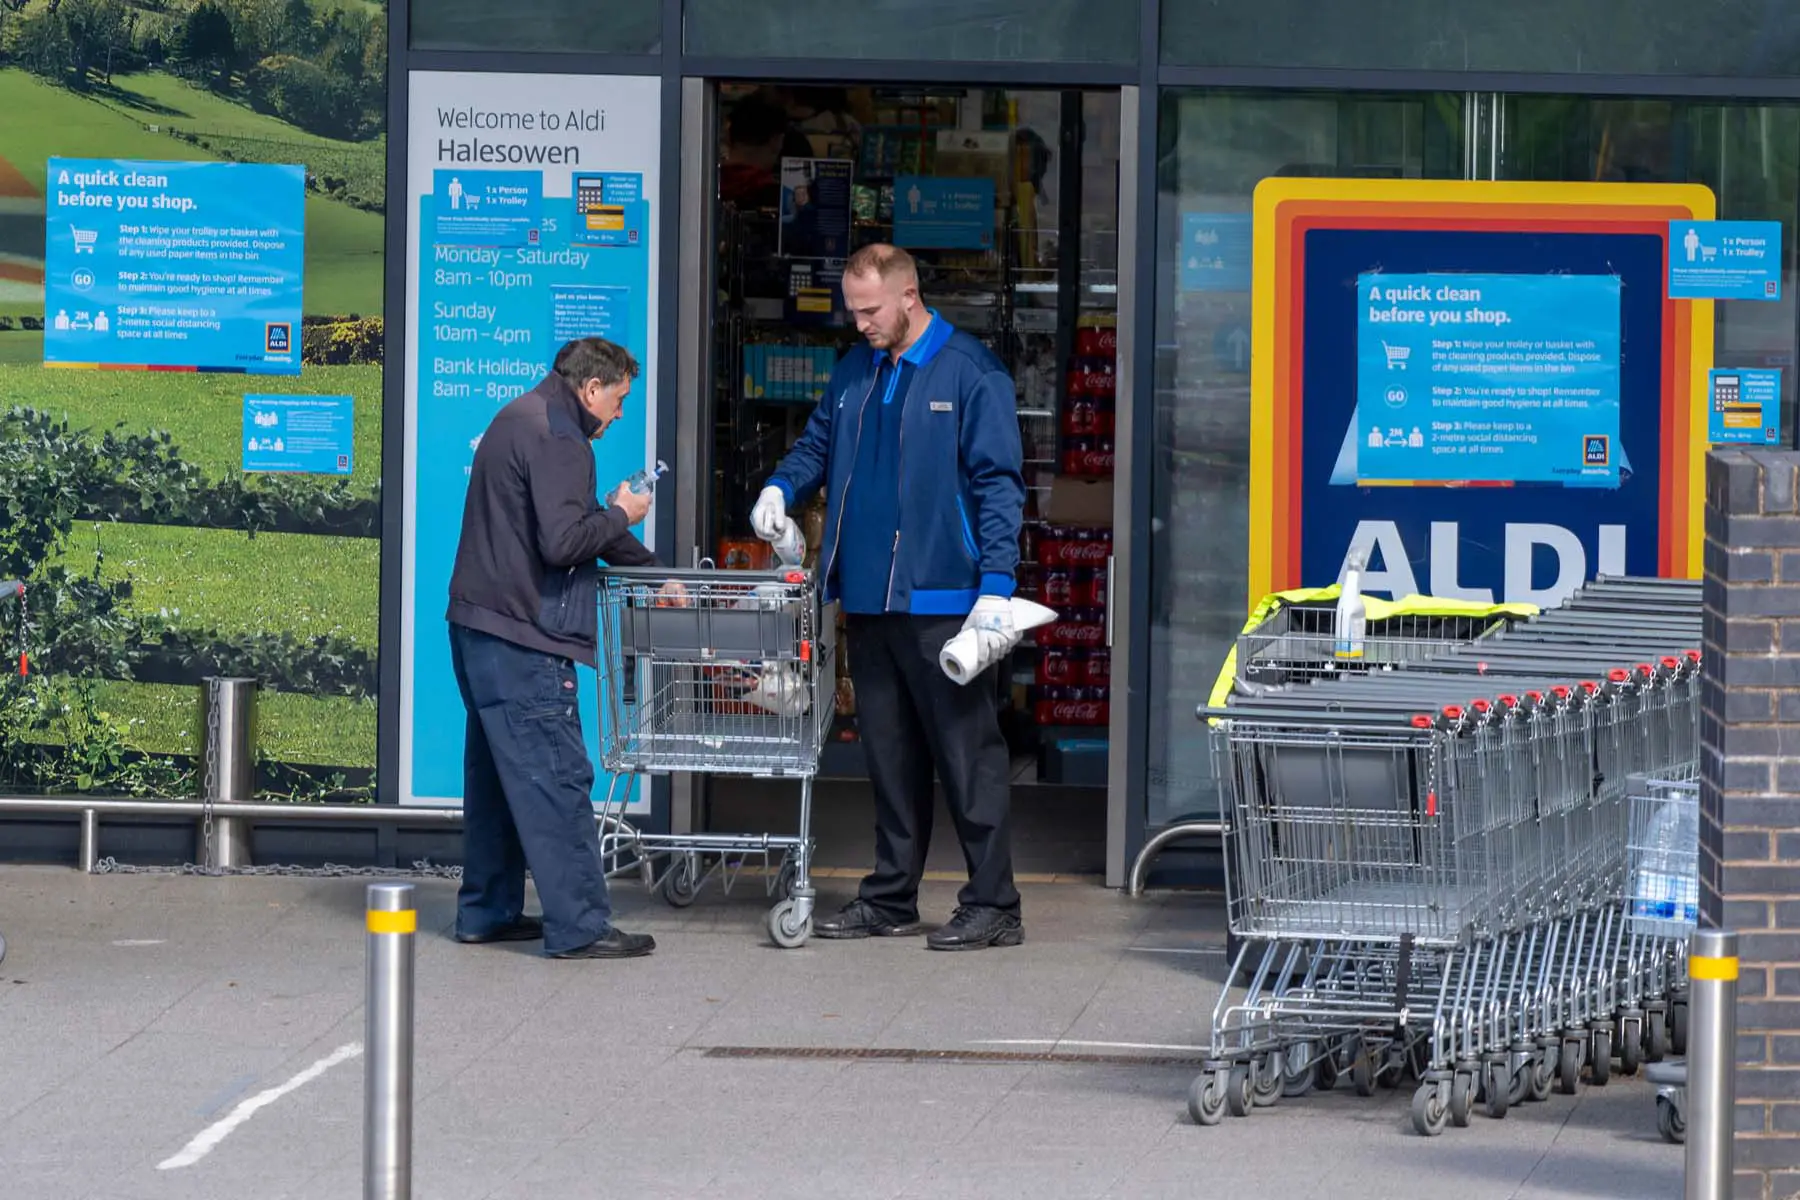 Supermarket workers in the UK